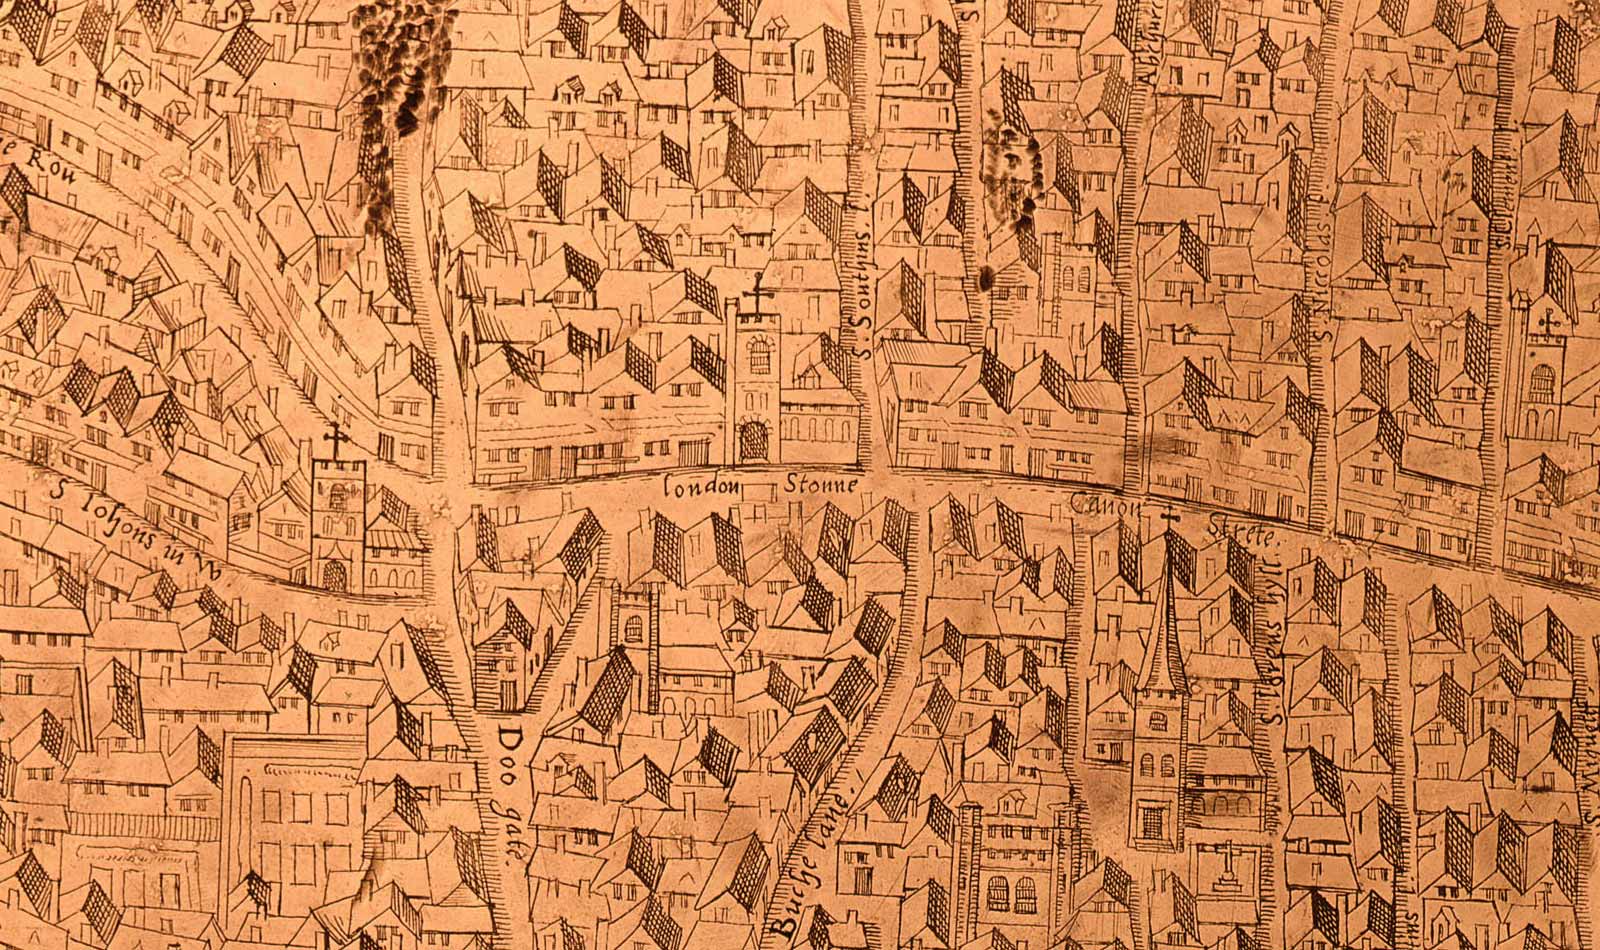 The London Stone shown on the first copperplate map of London, 1558.